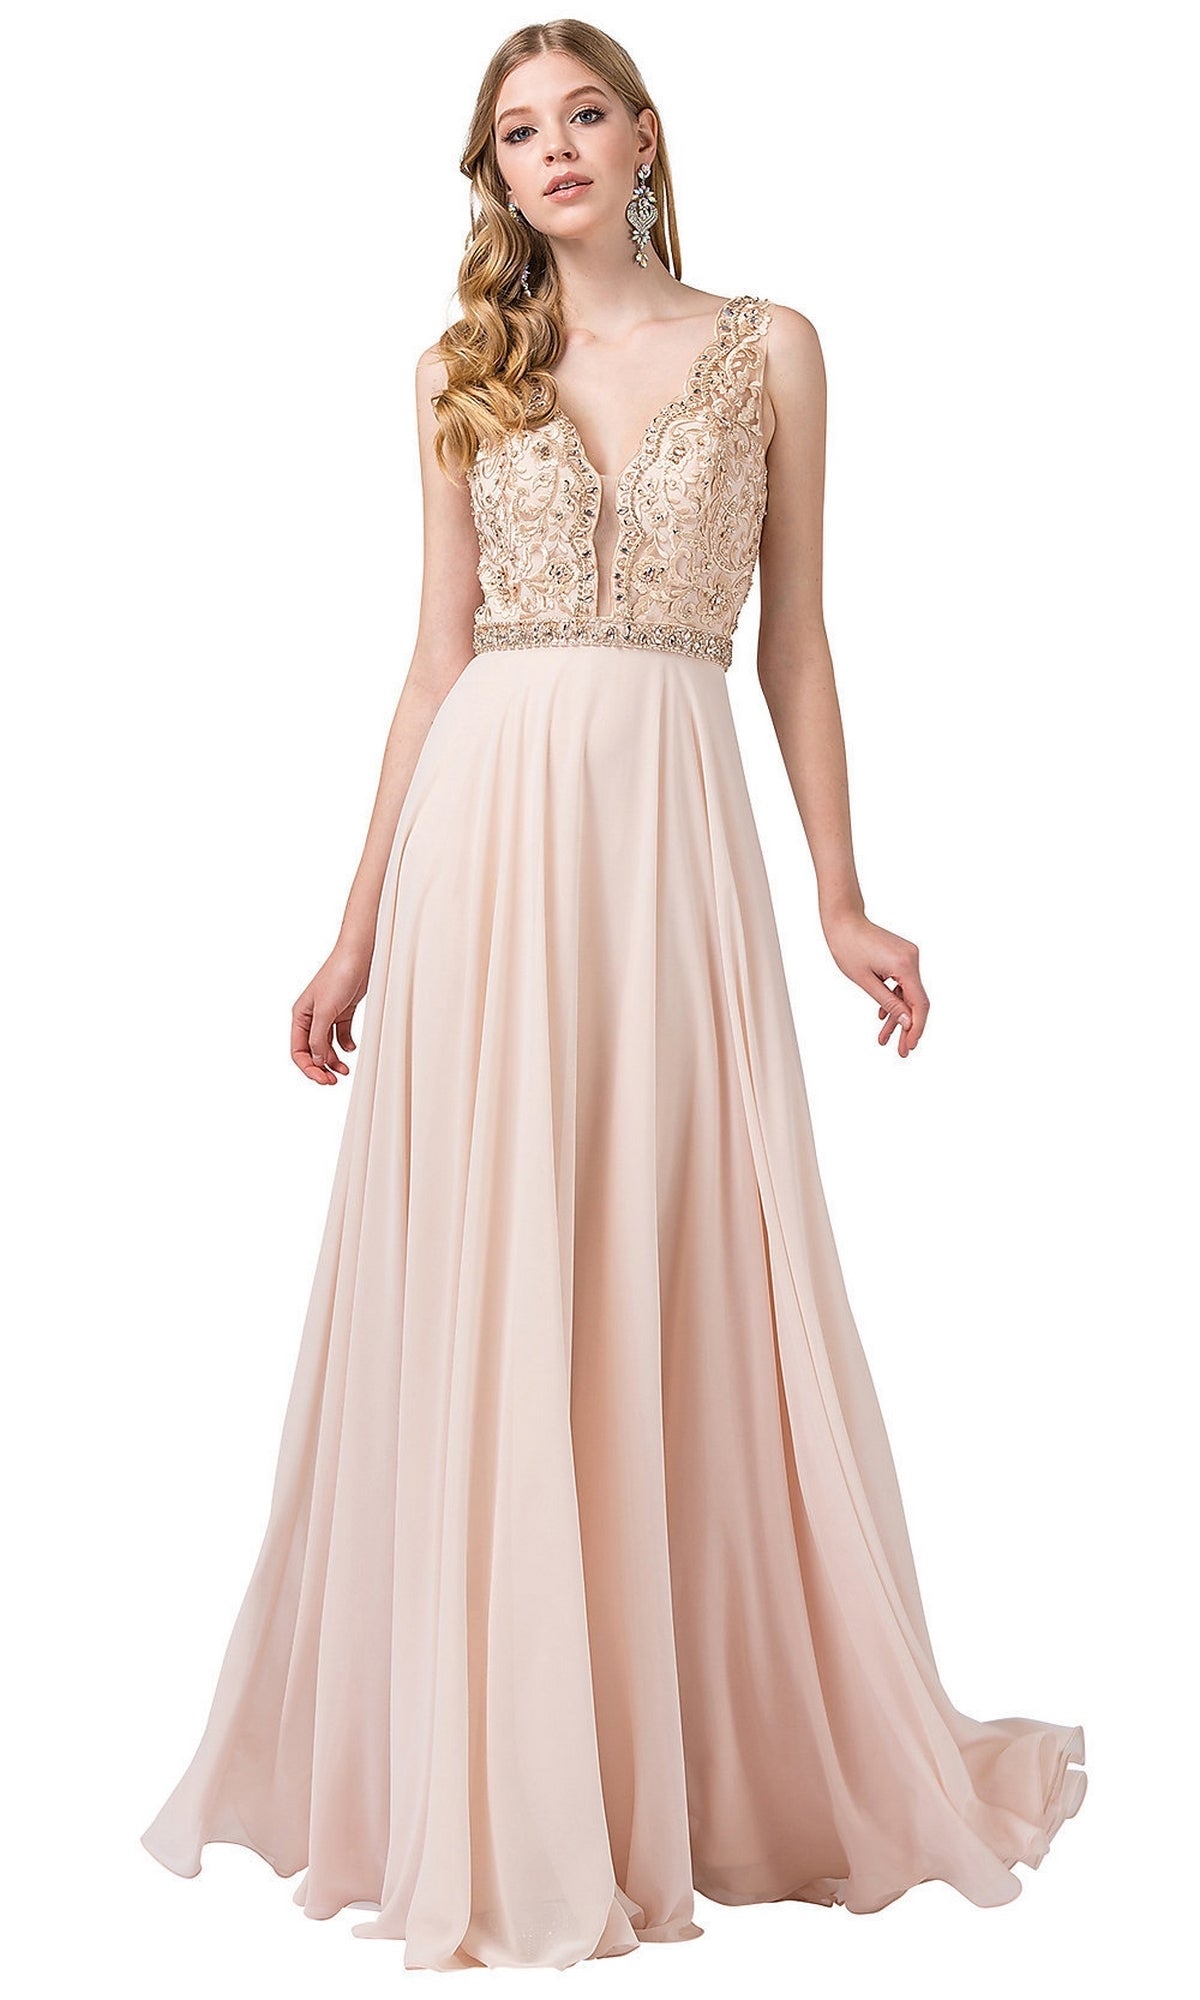 Champagne V-Neck Chiffon Formal Dress with Embroidered Bodice